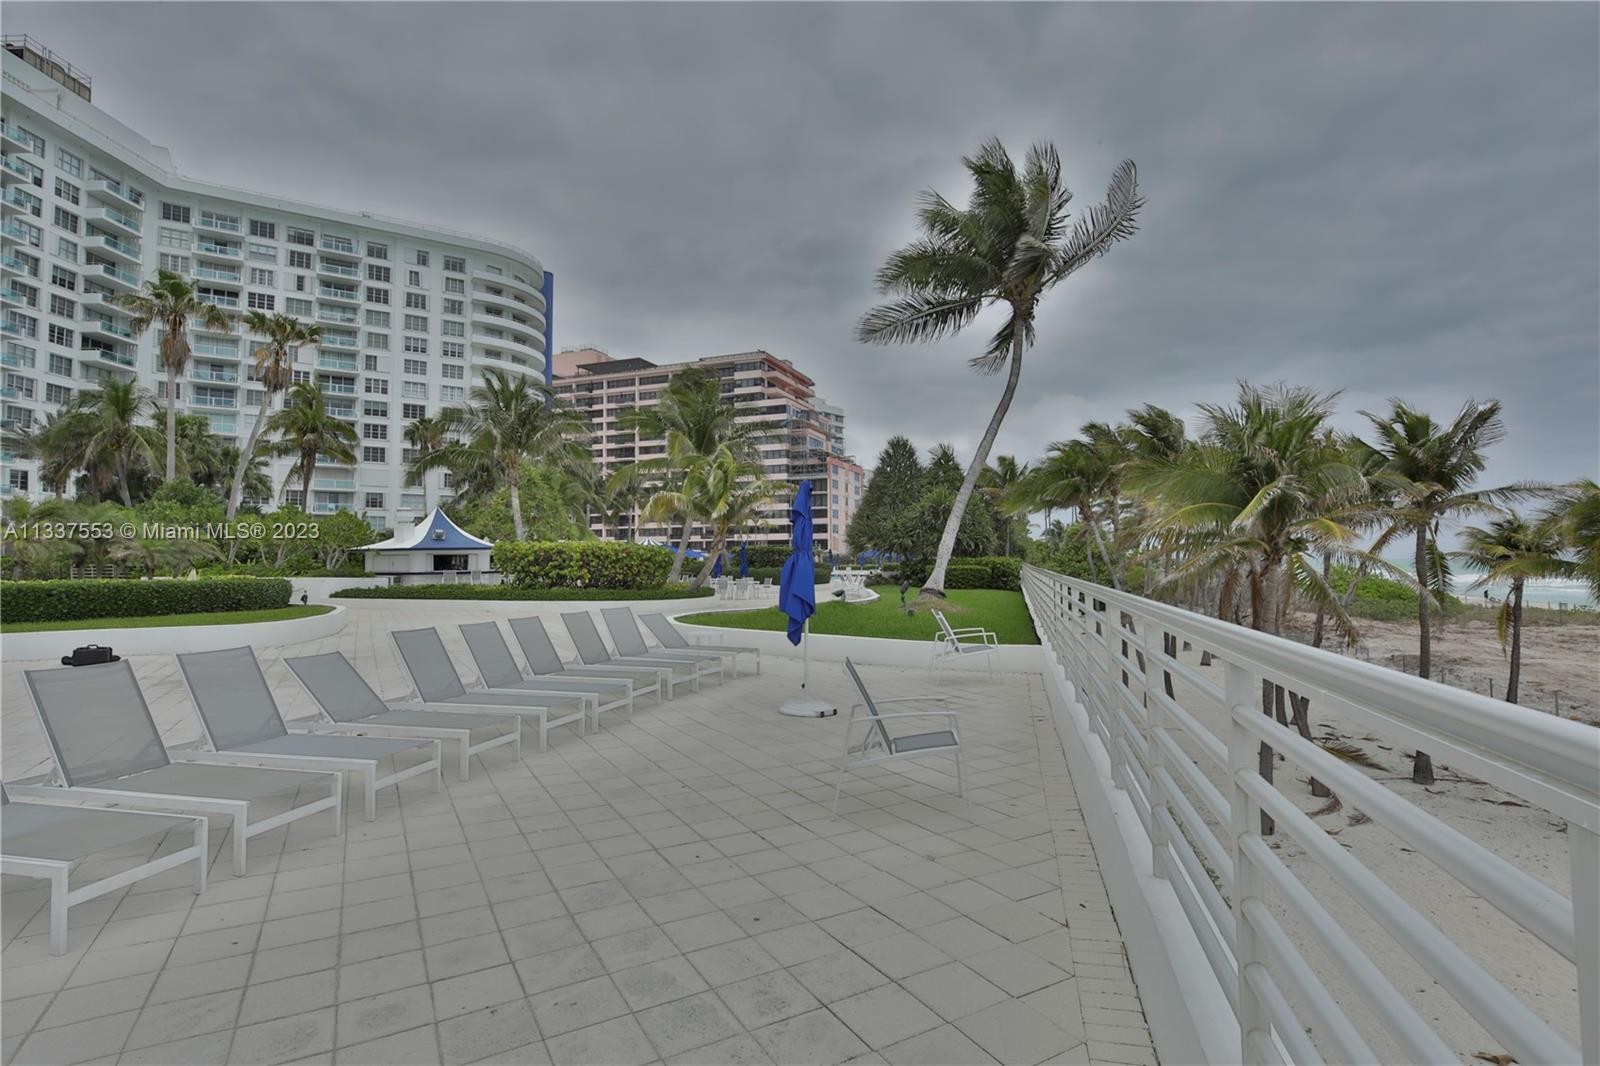 25. 5151 Collins Ave